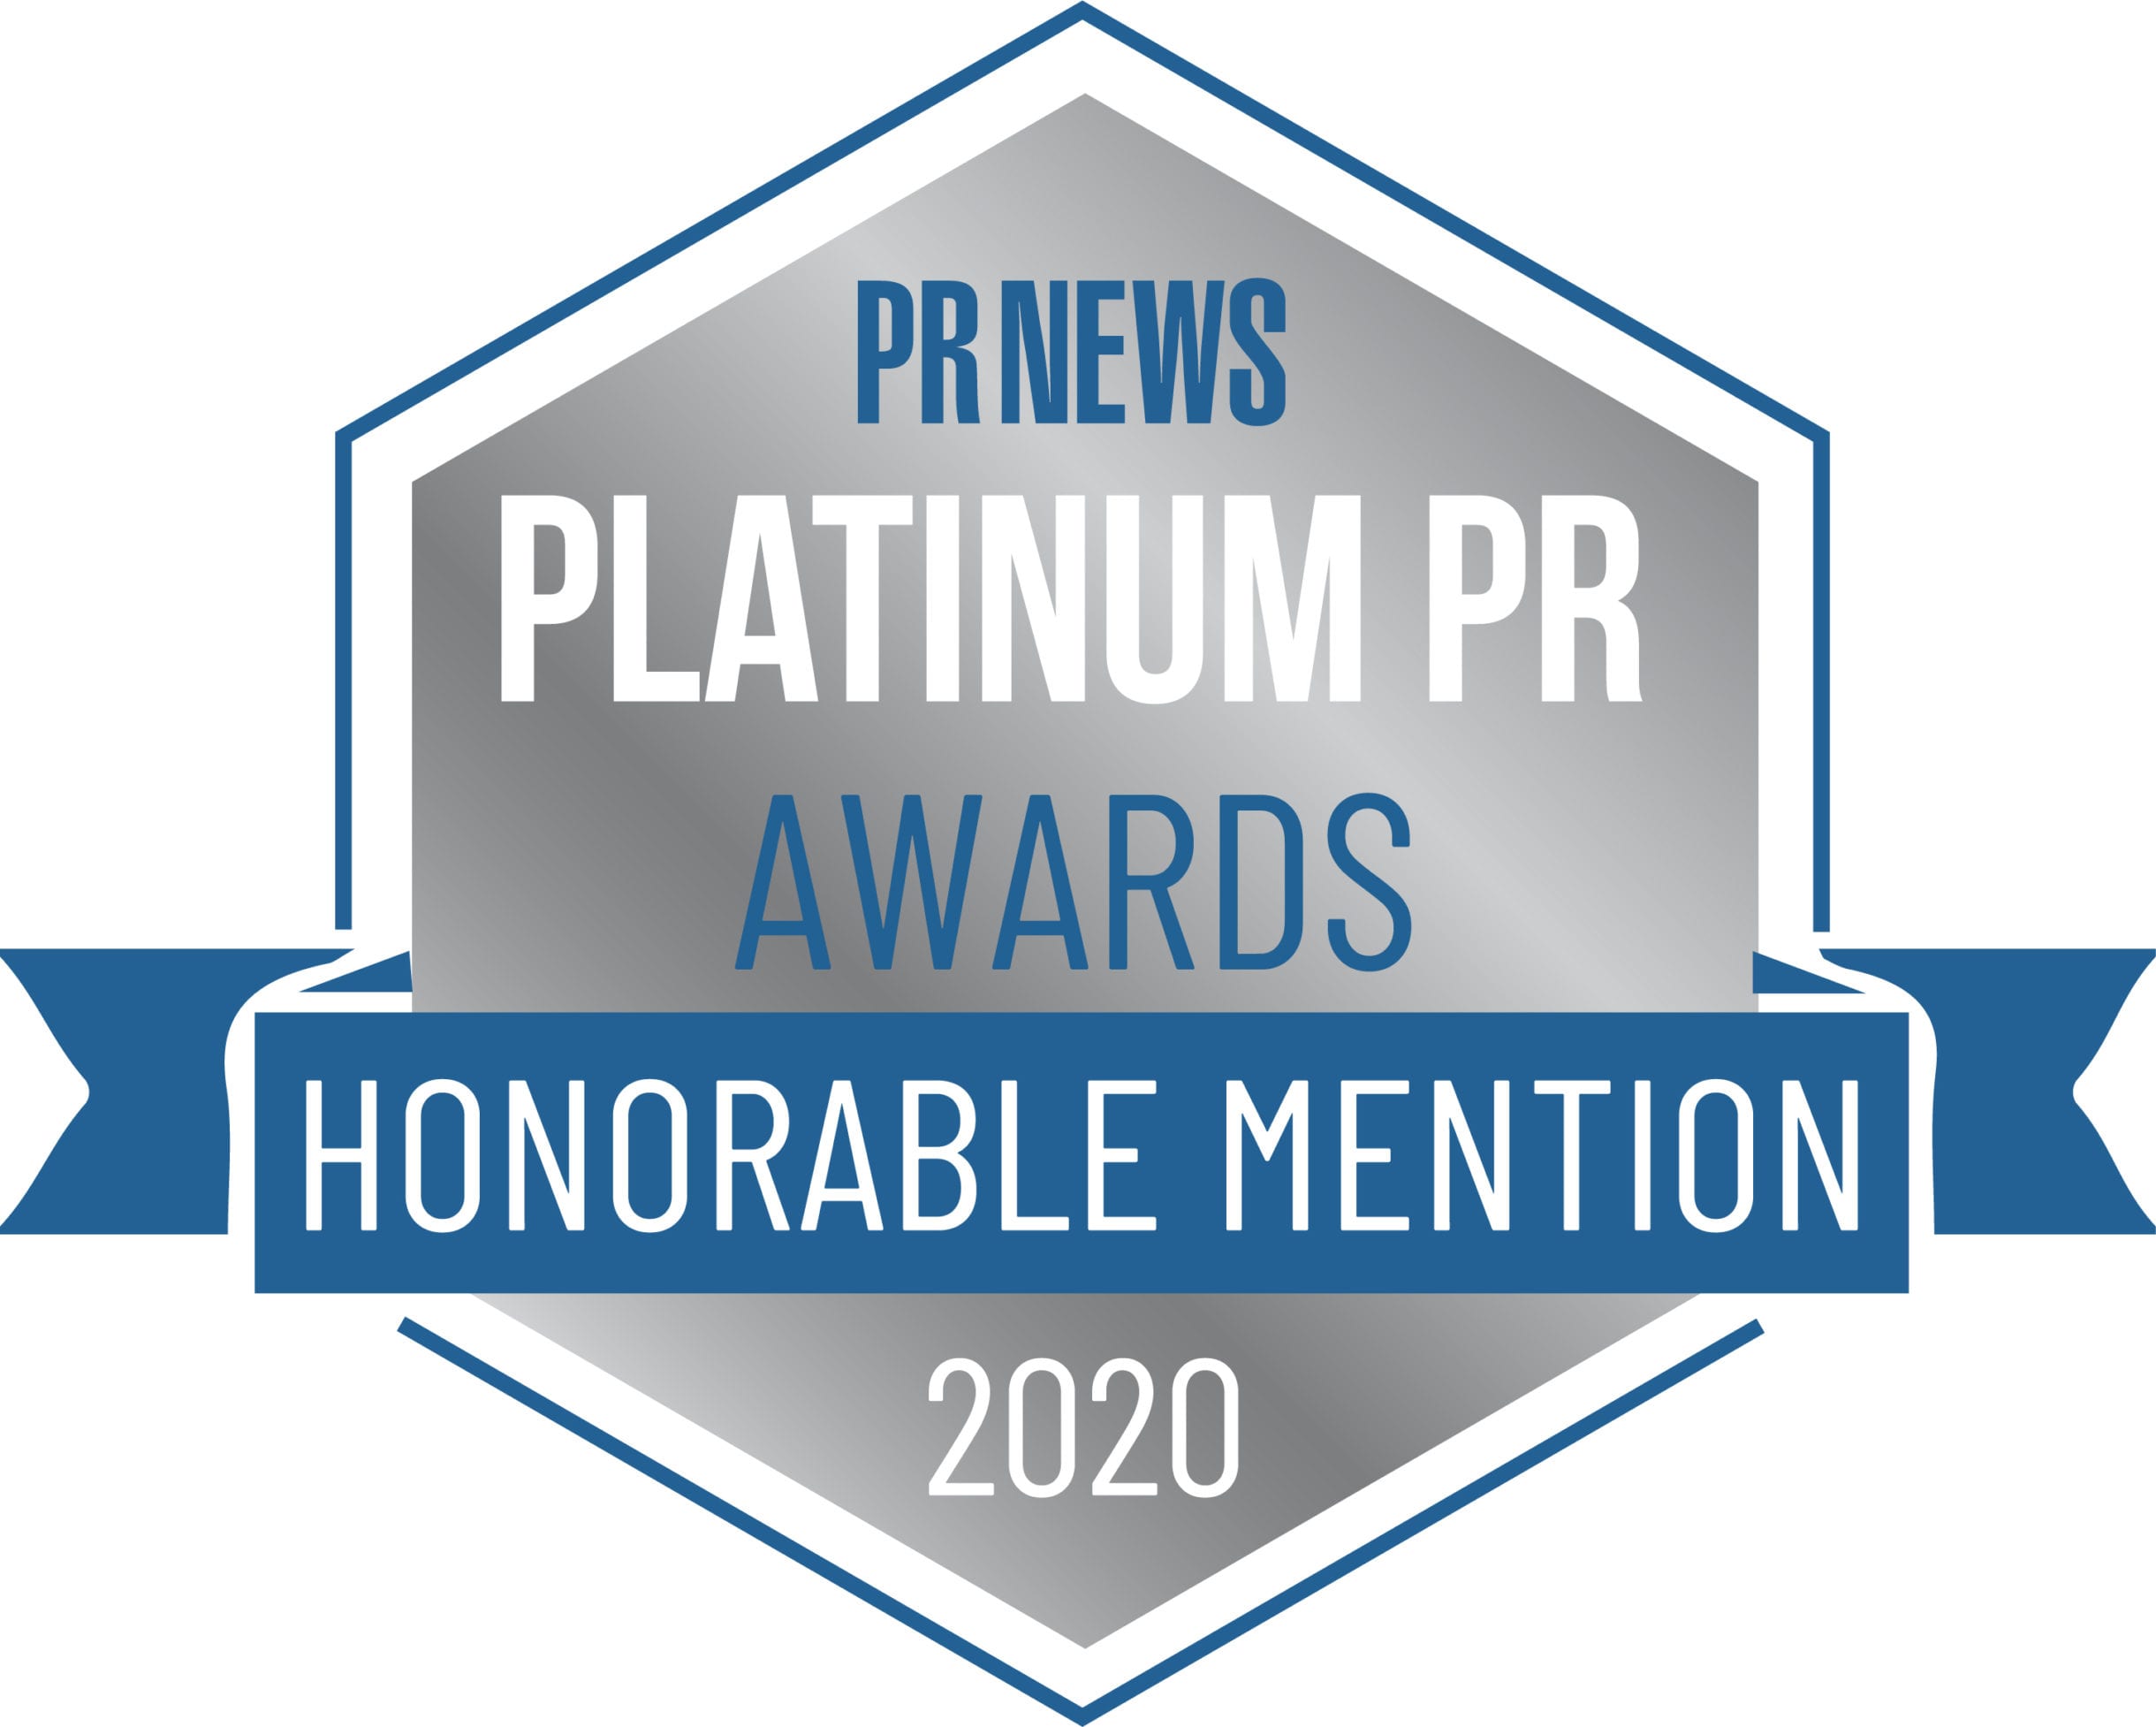 Our Marketing & PR Agency Awards PAN Communications